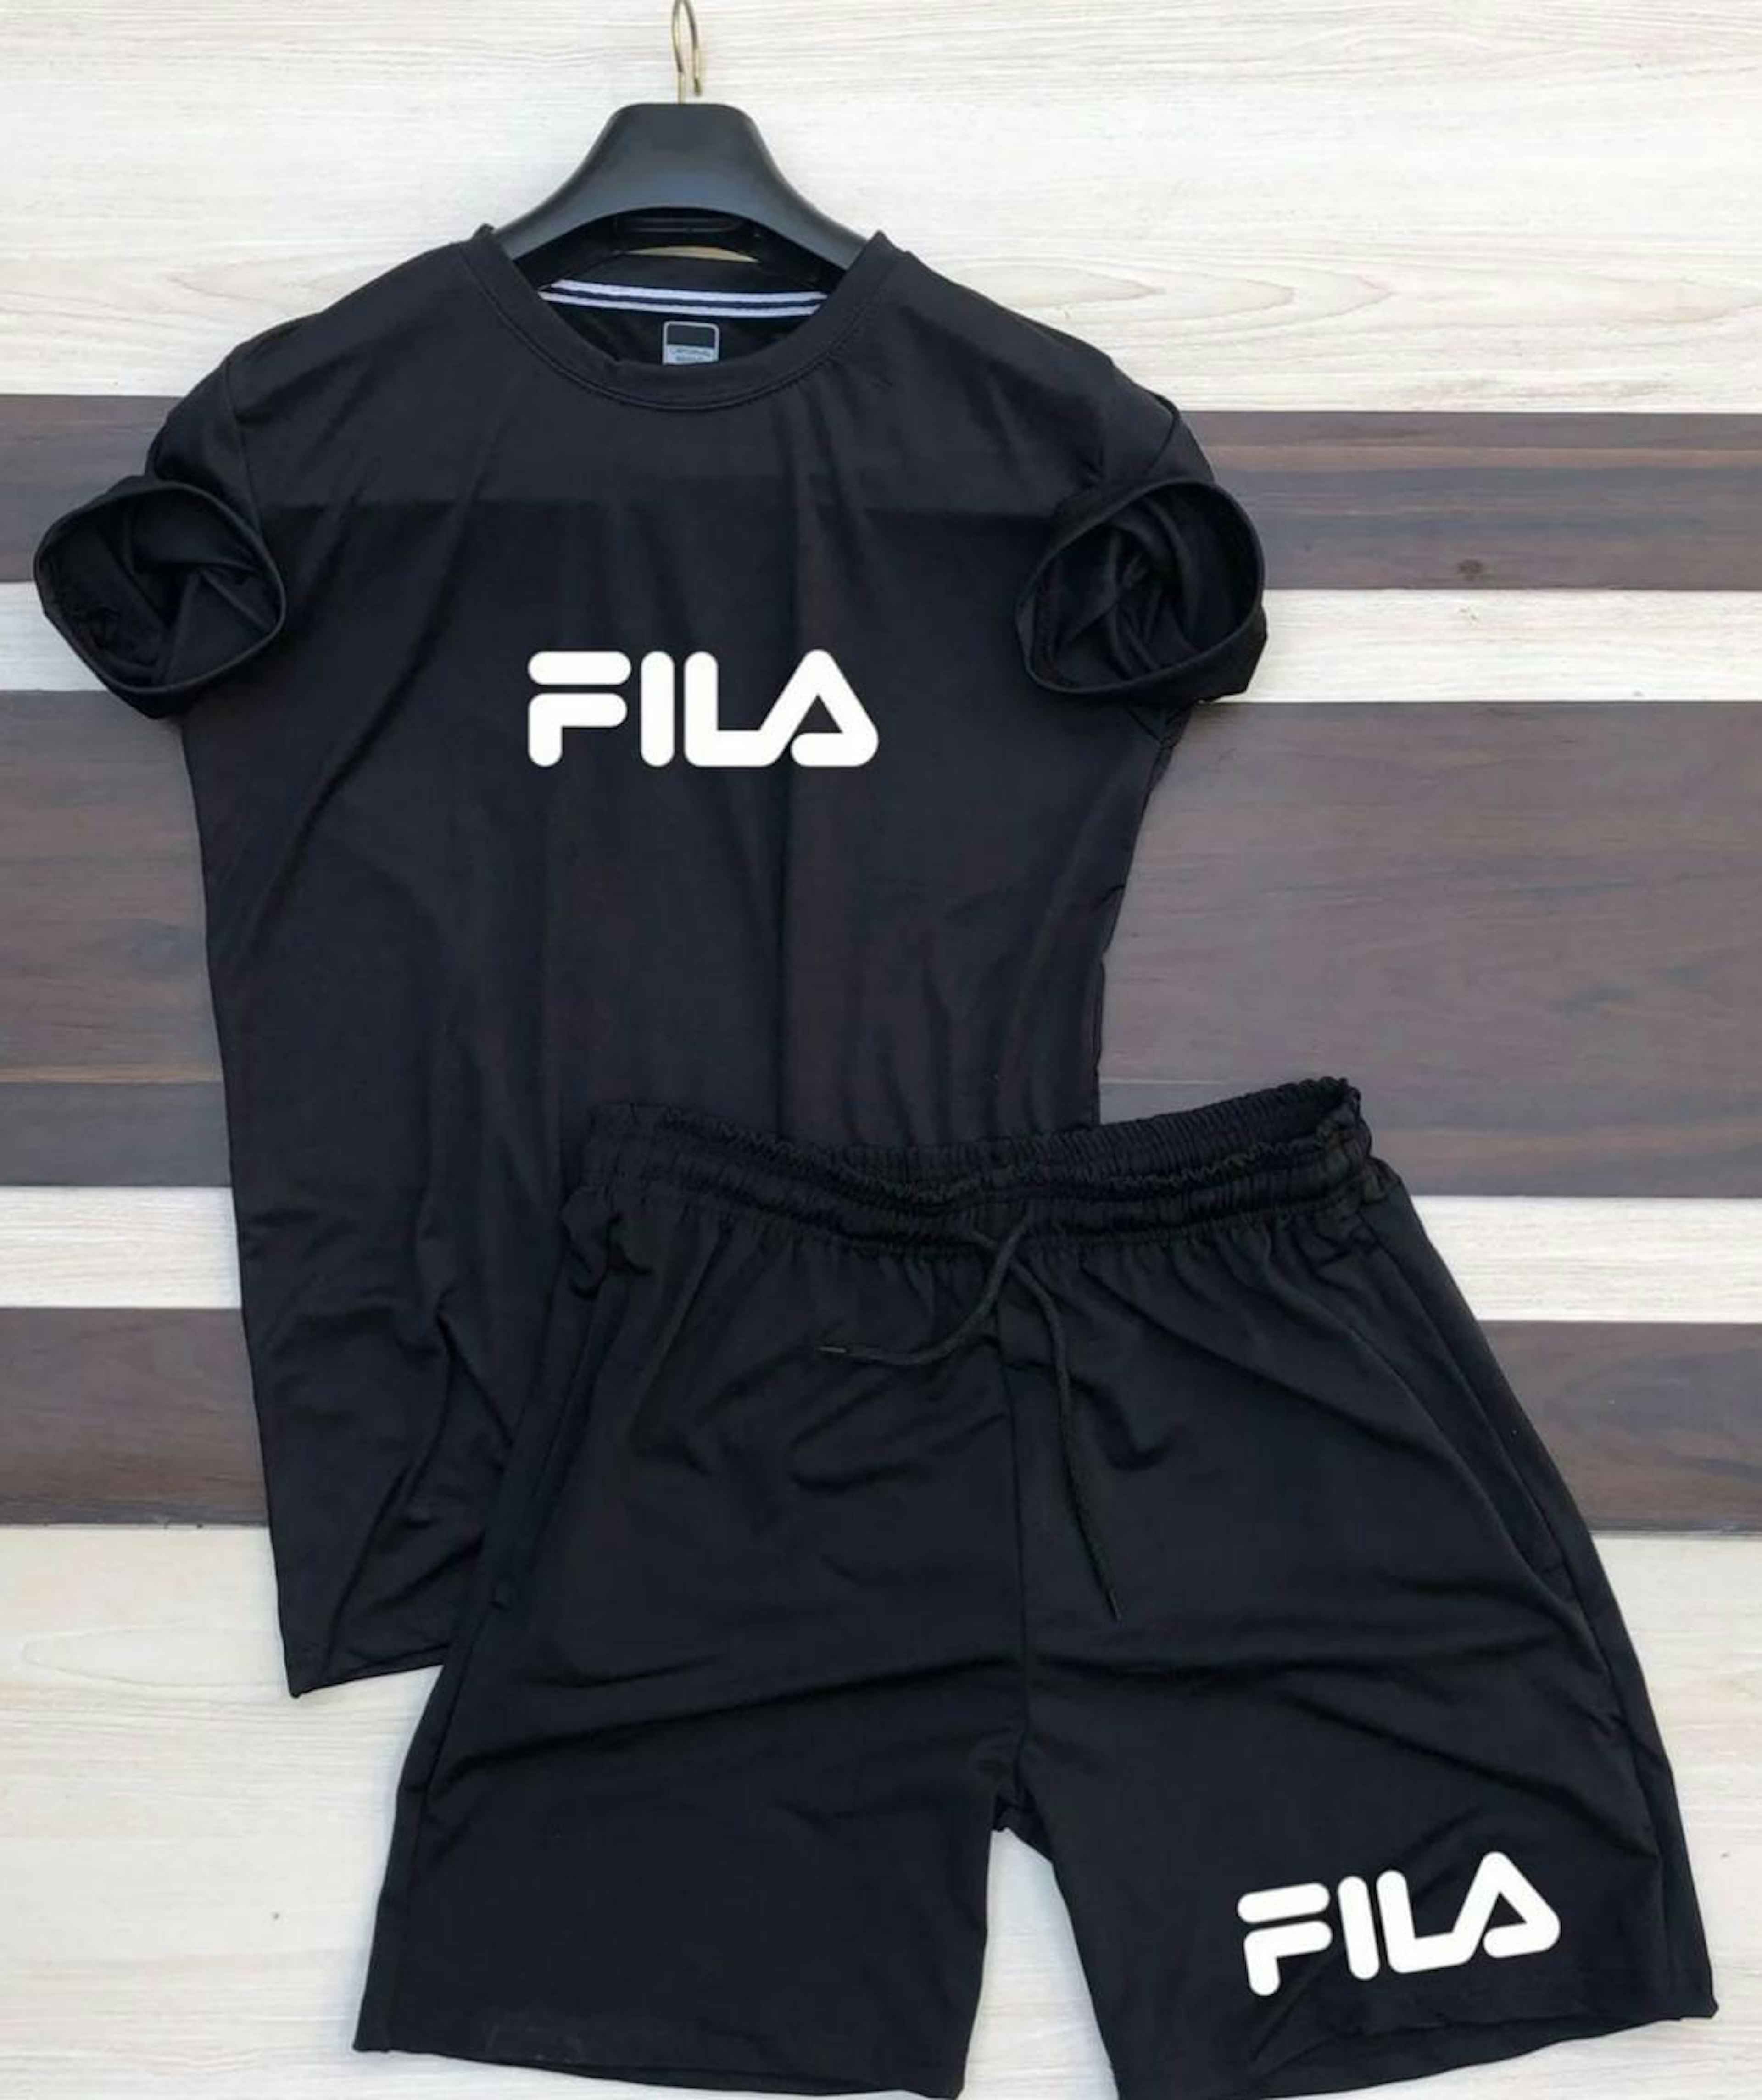 View - Fila T-Shirt and Shorts photos, Fila T-Shirt and Shorts available in Surat, make deal in 399